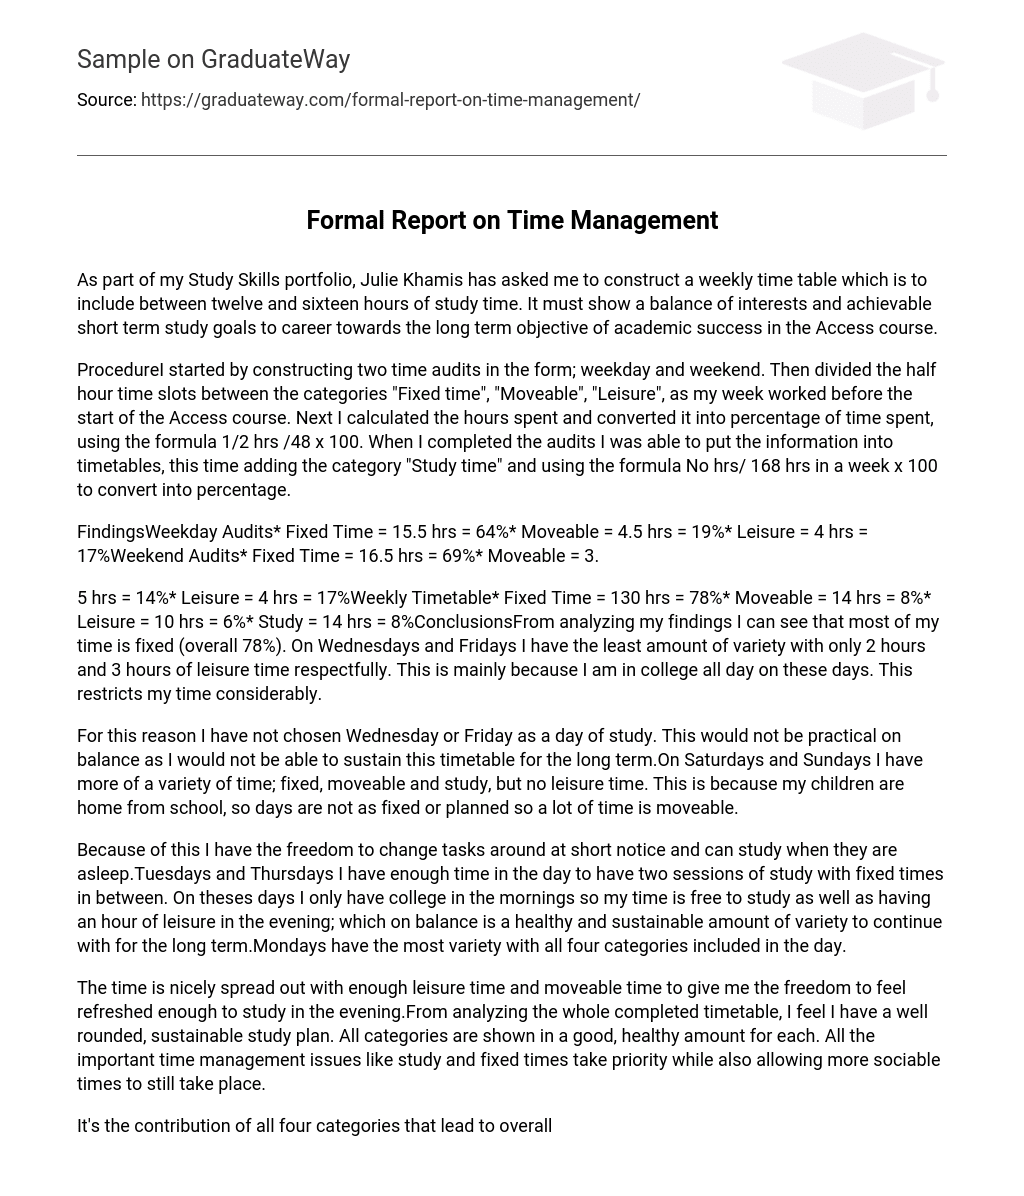 Formal Report on Time Management